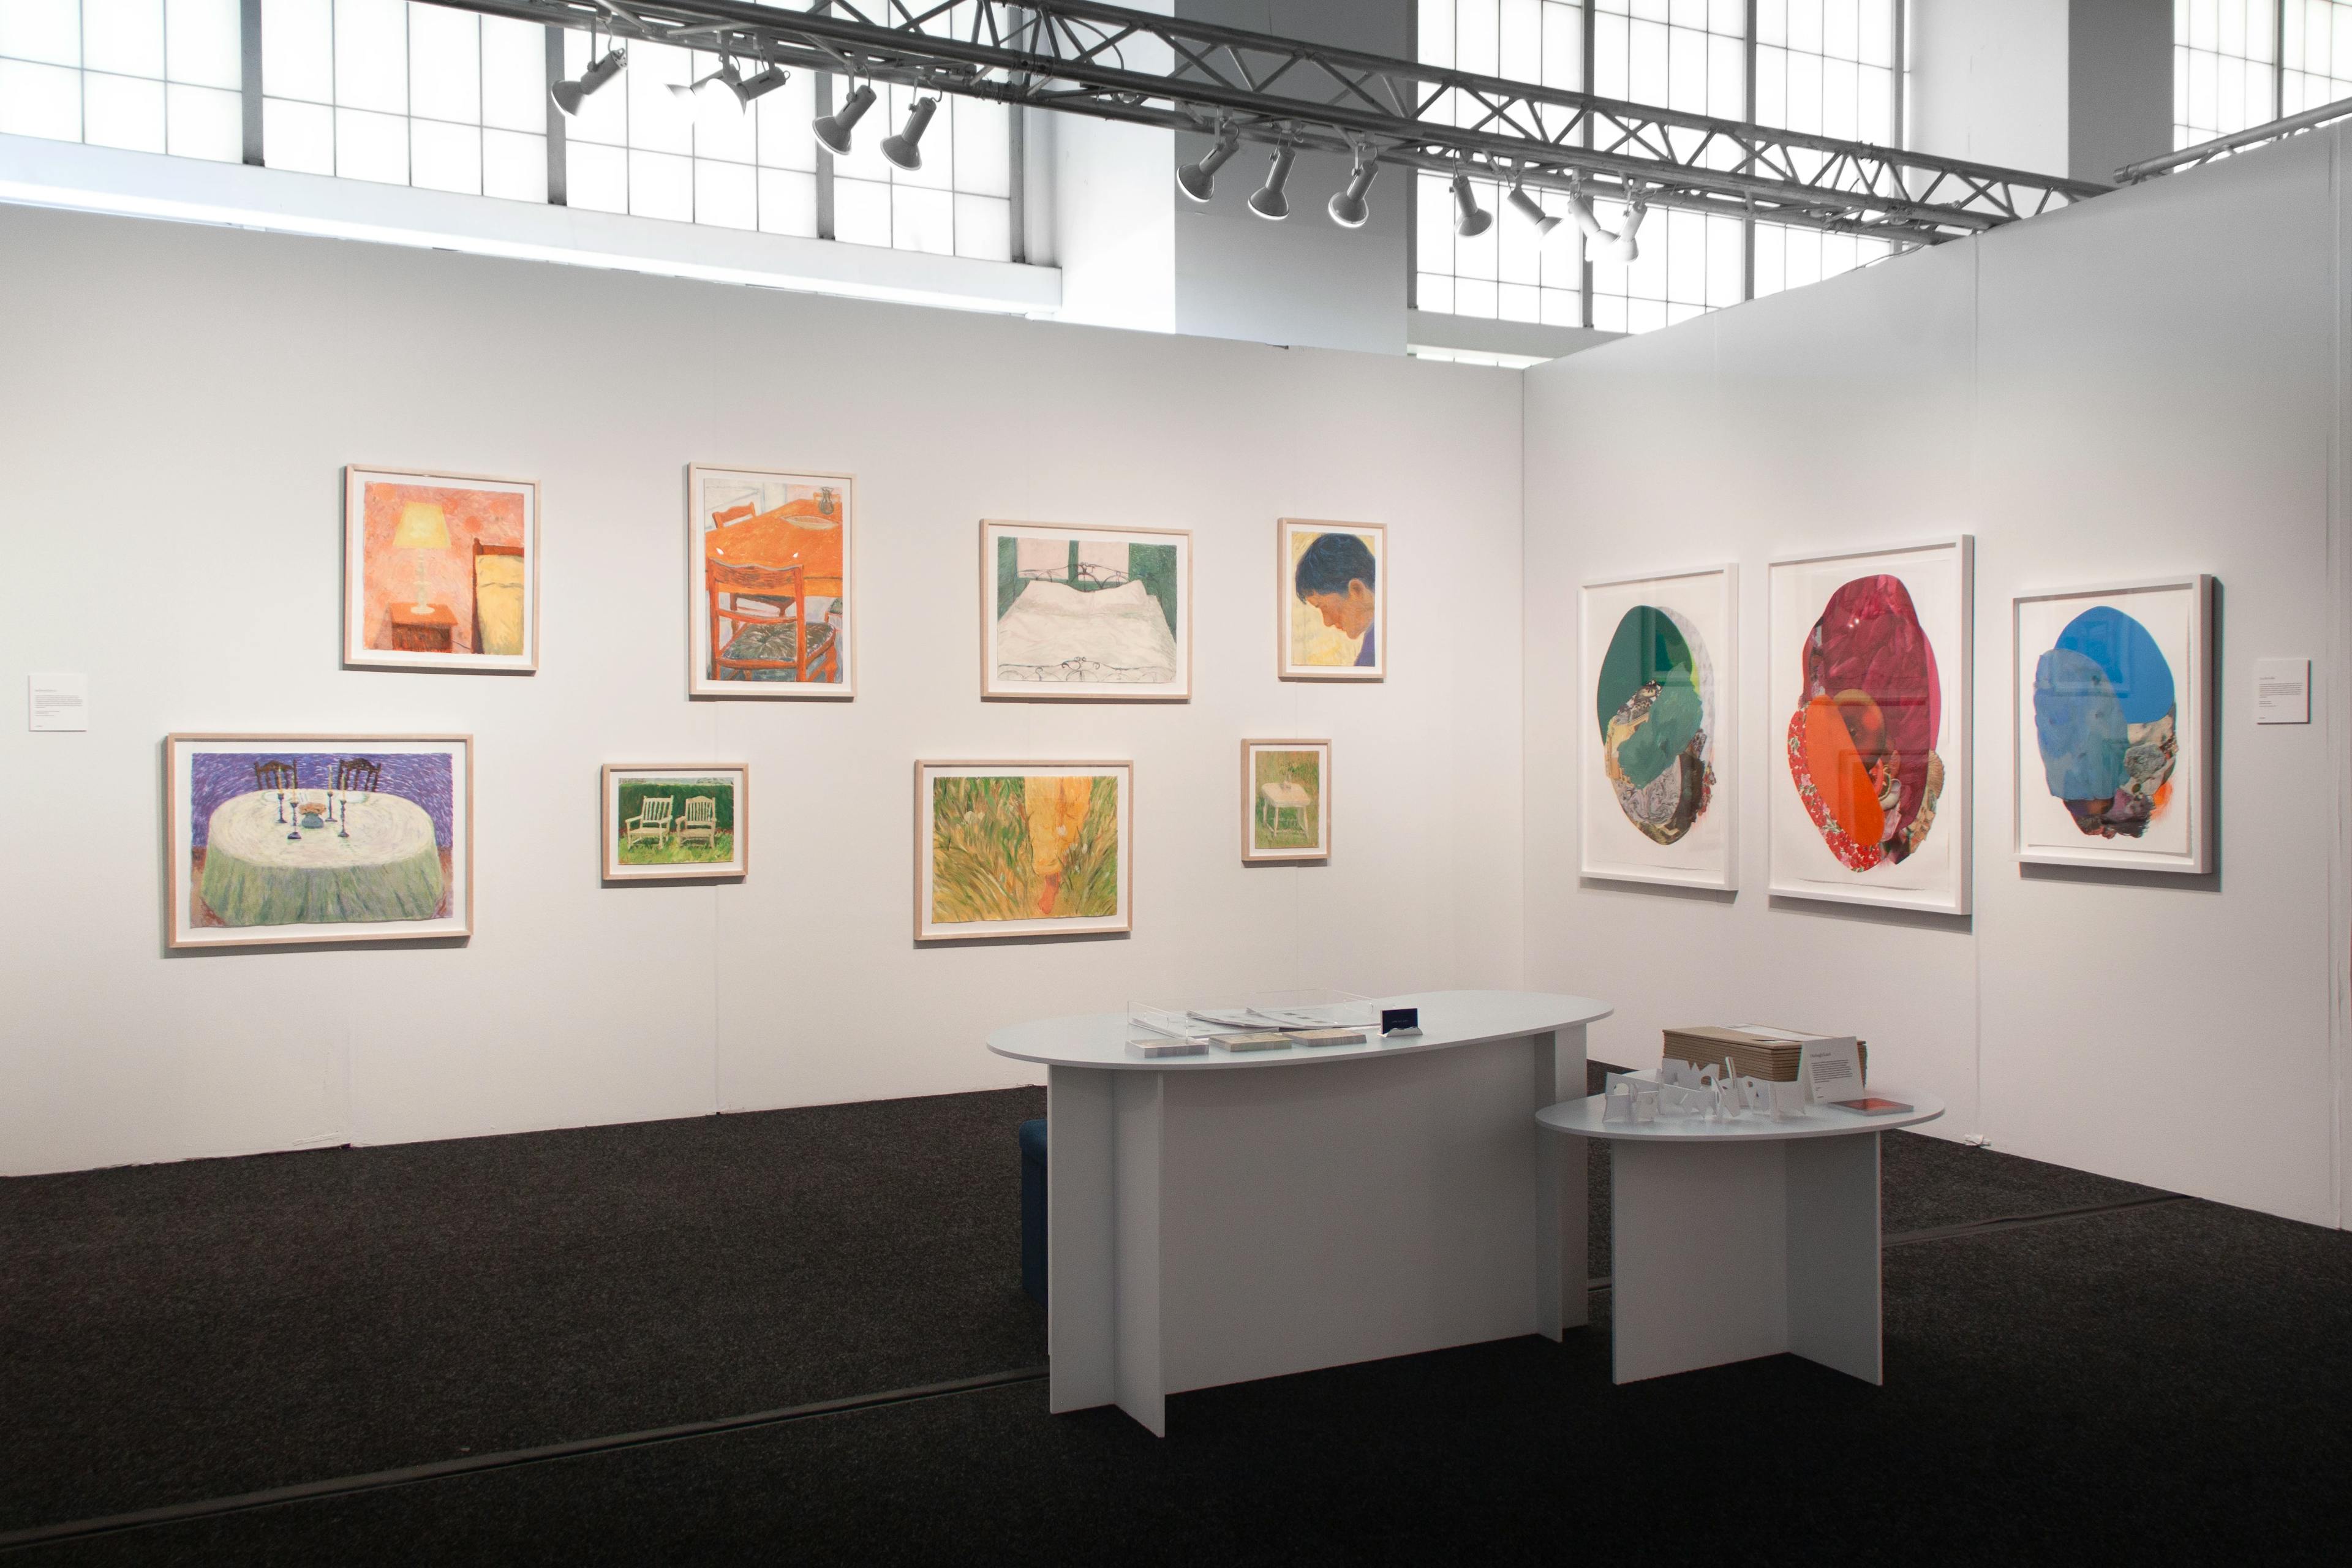 Artwork installed as part of Art on Paper, one of Uprise Art's Art Fairs in New York, NY.